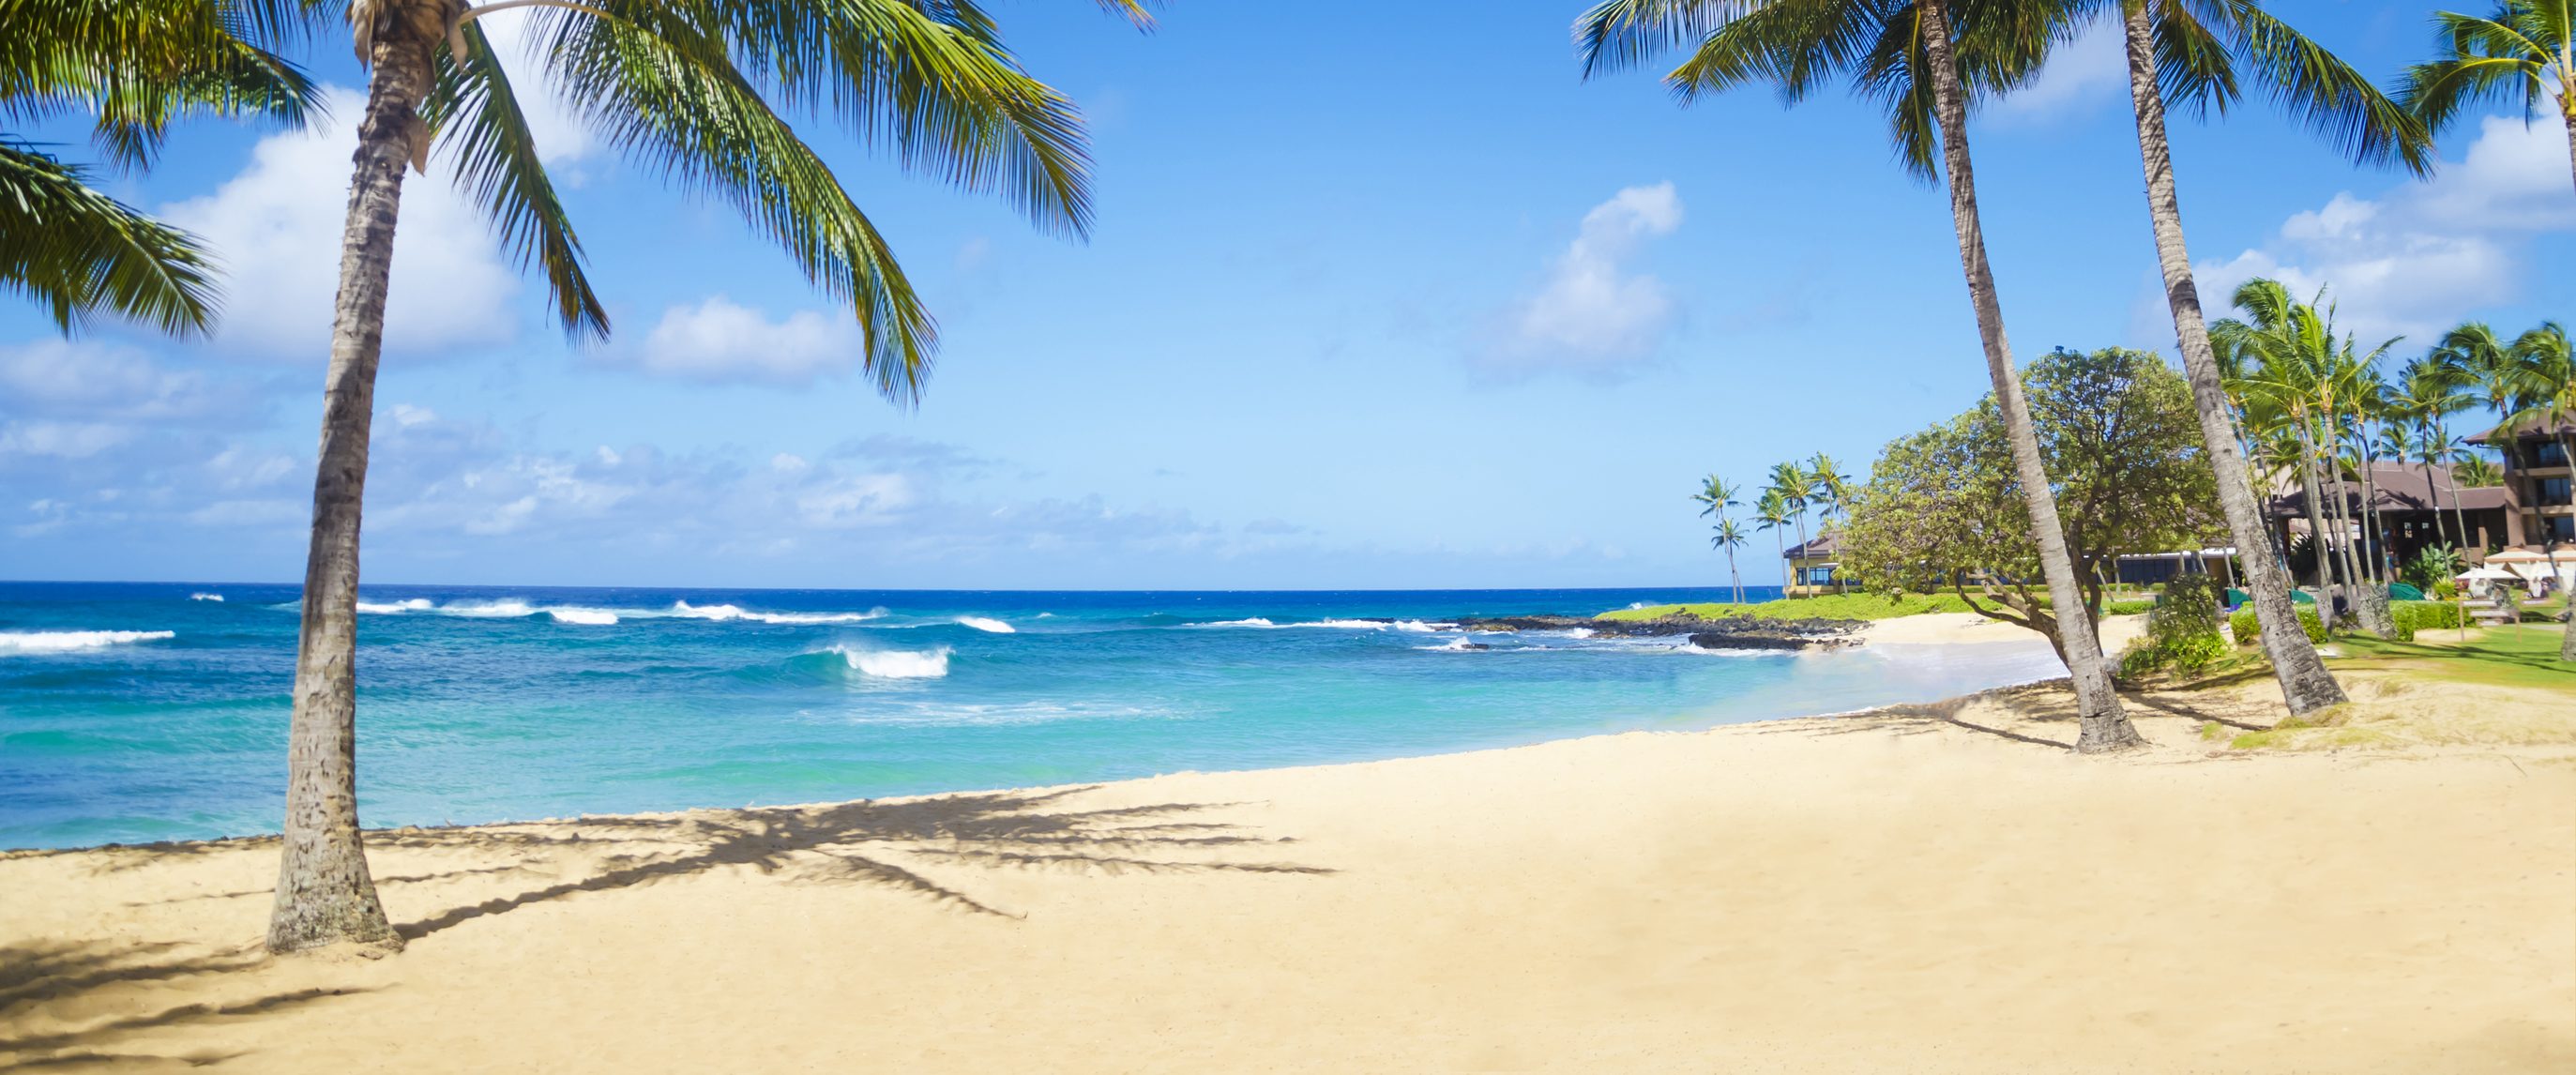 Round-trip flights to Hawaii in the $300s